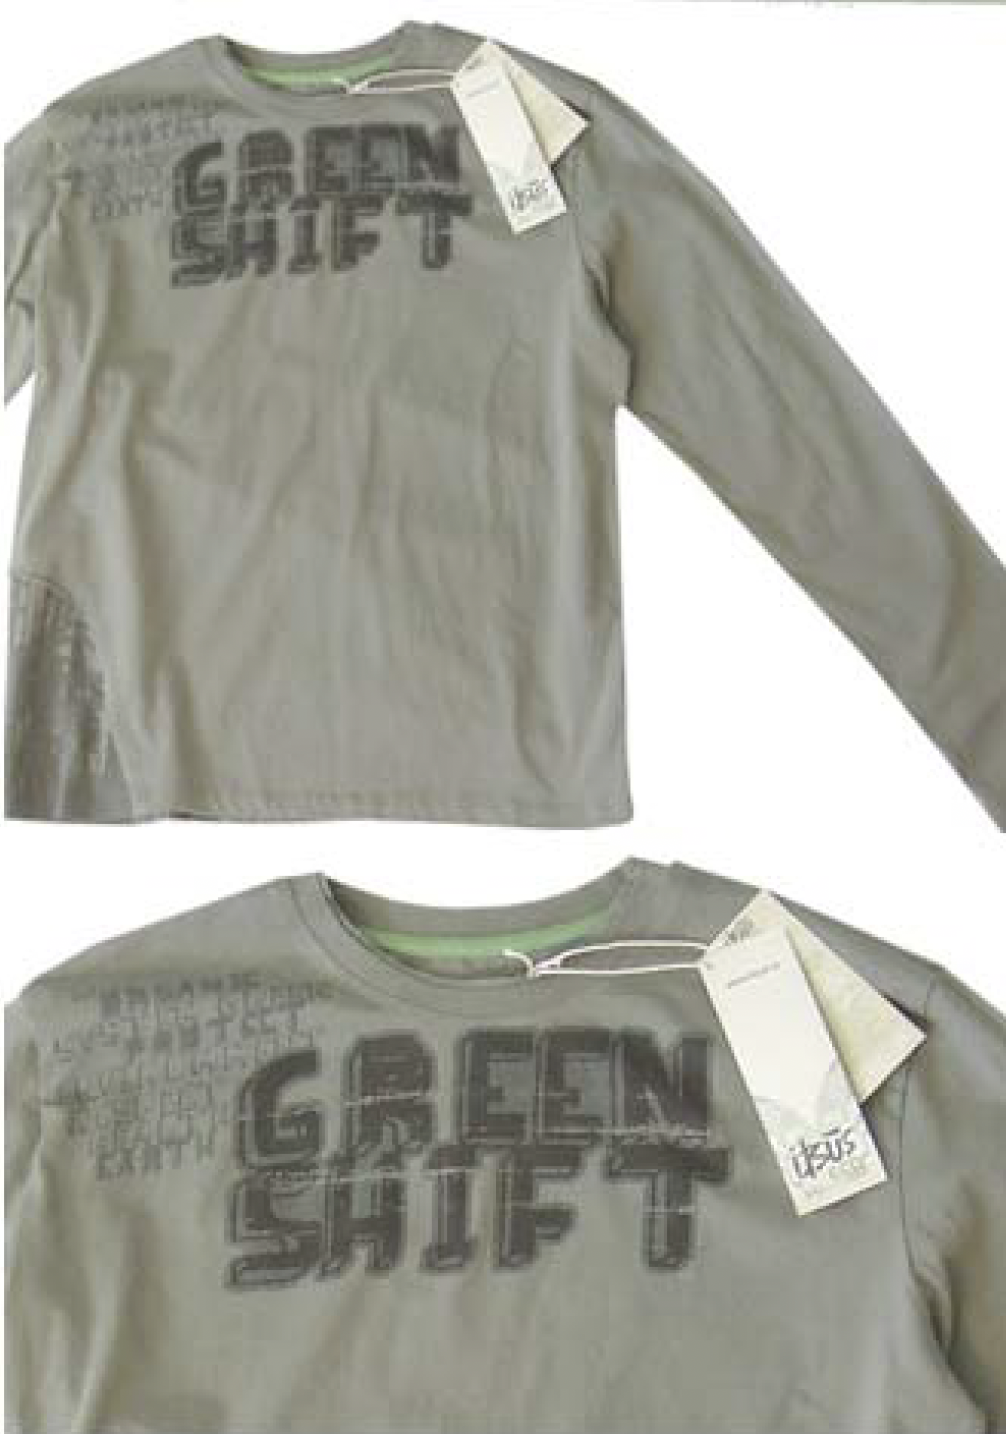 Itsus Vintage Men's Long-Sleeve "Shift" in Warm Night (2009 Collection) - Email Us to Order